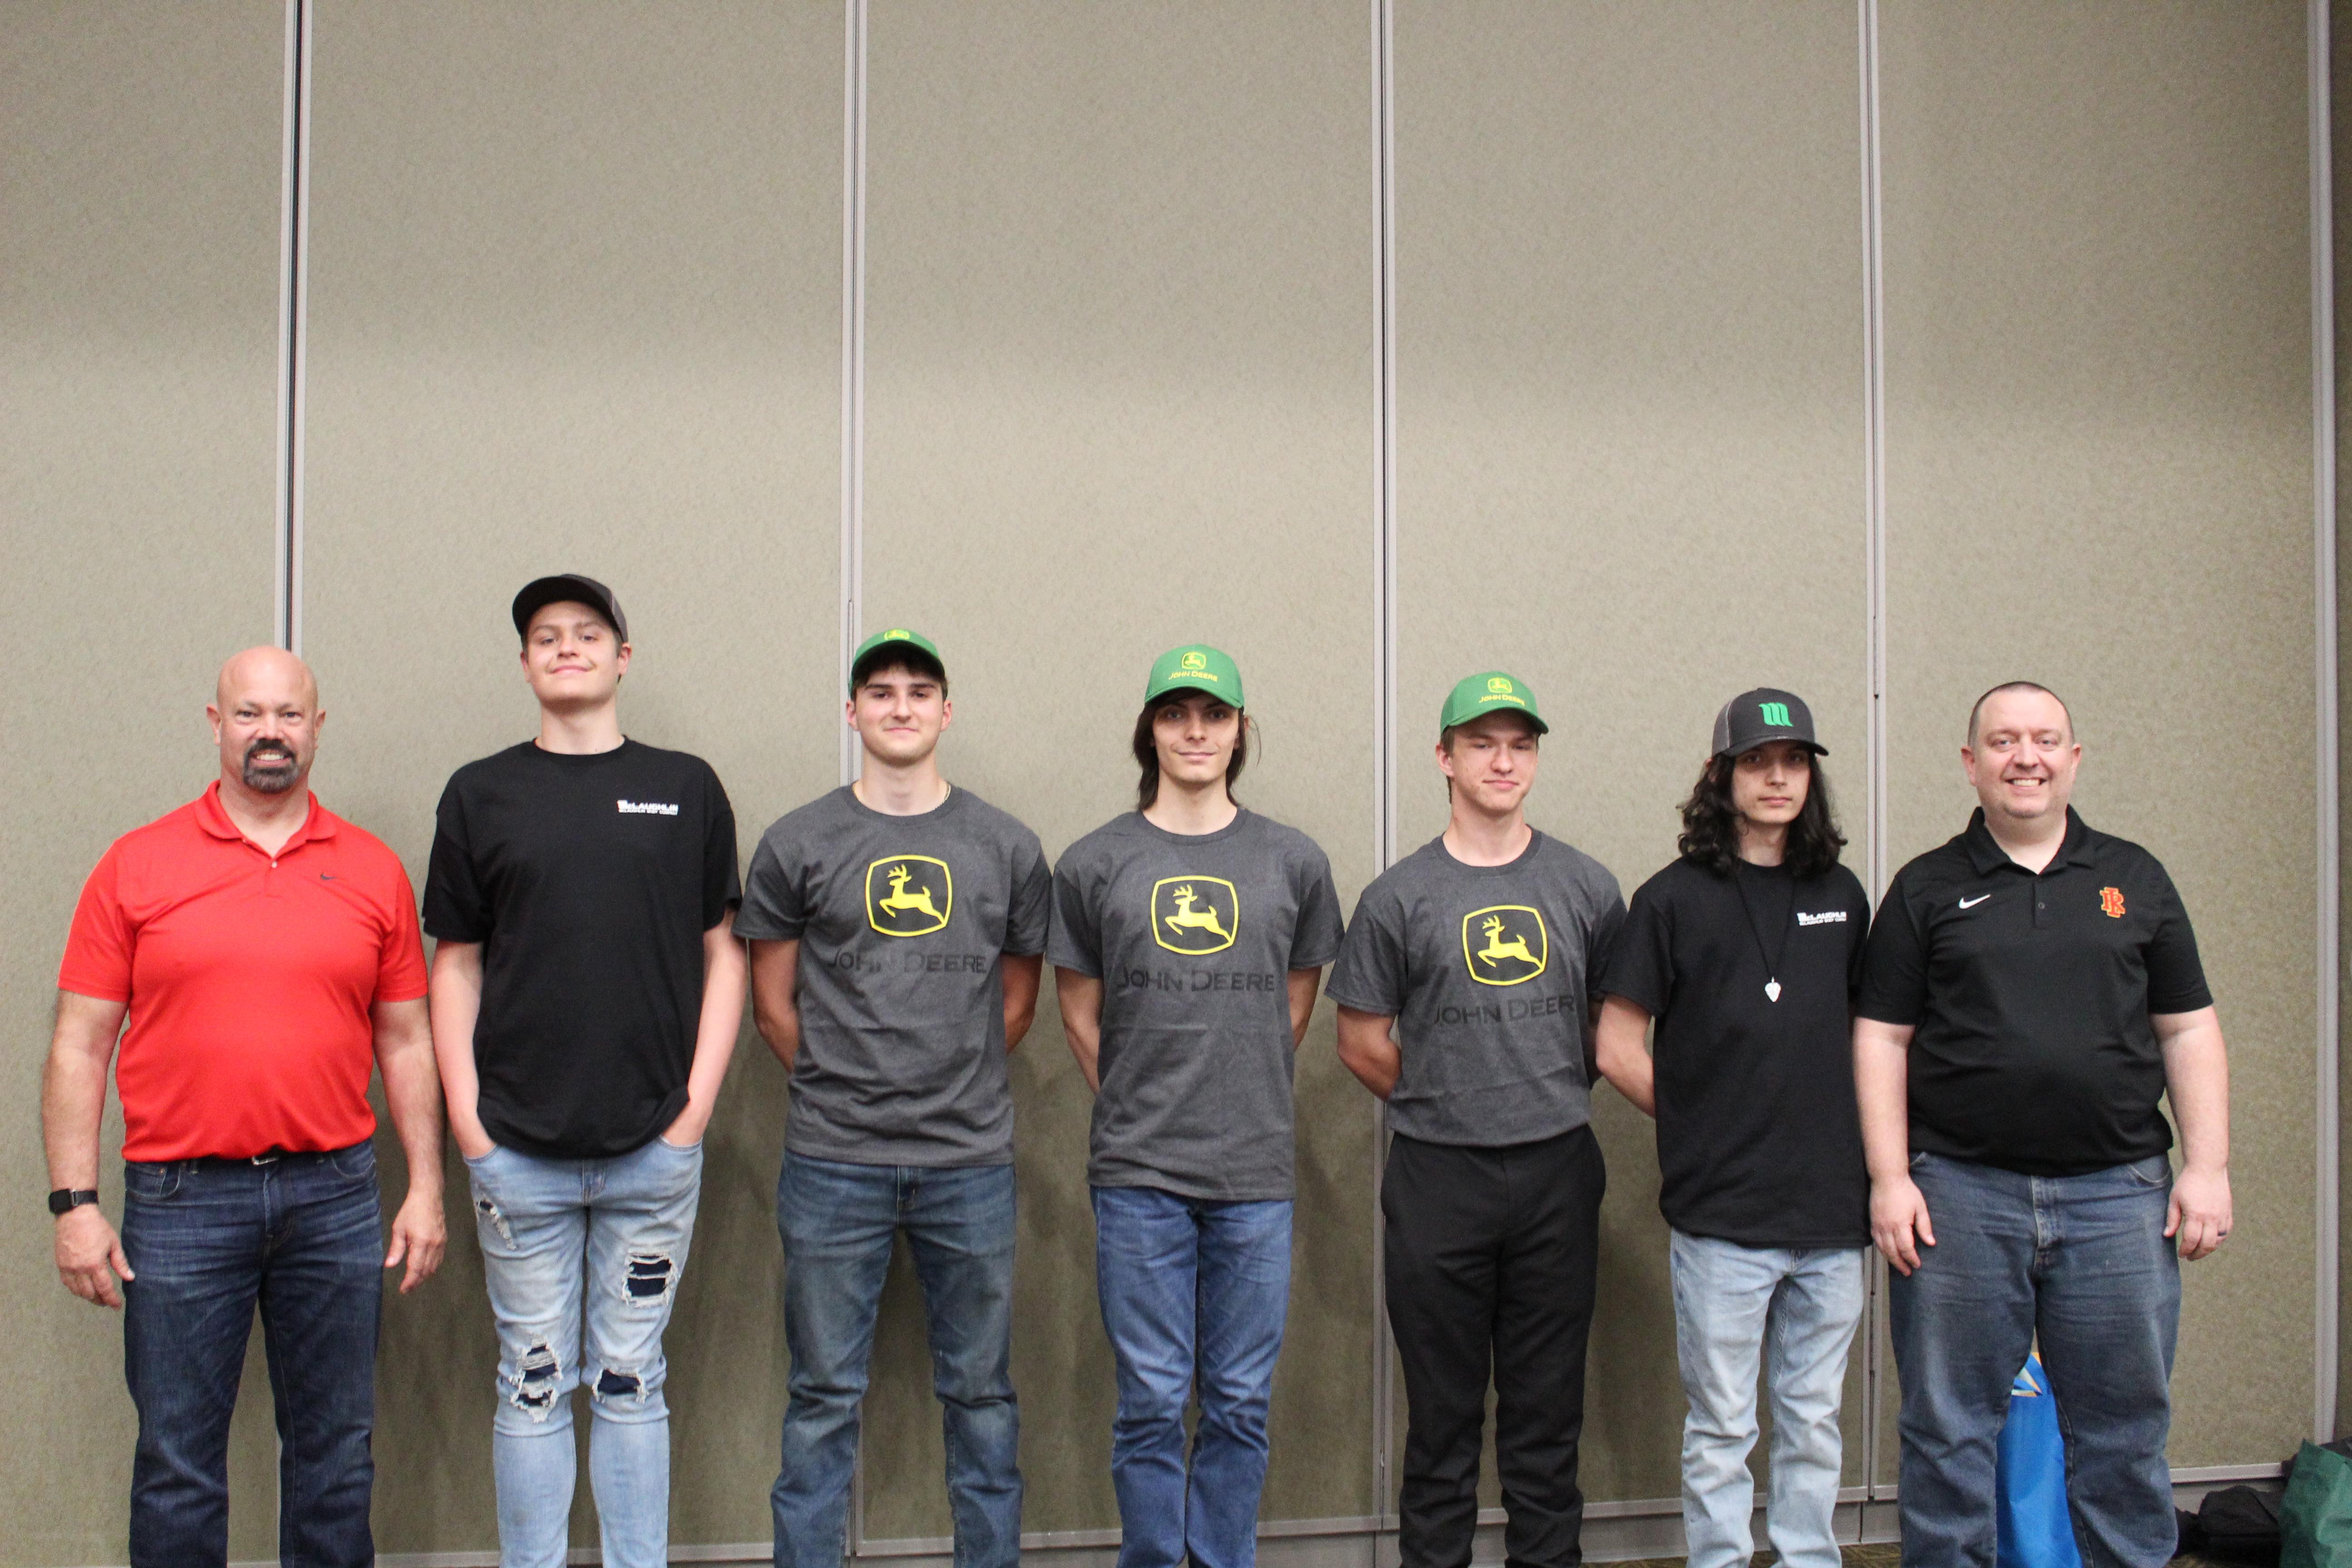 group picture of welding students and their instructors